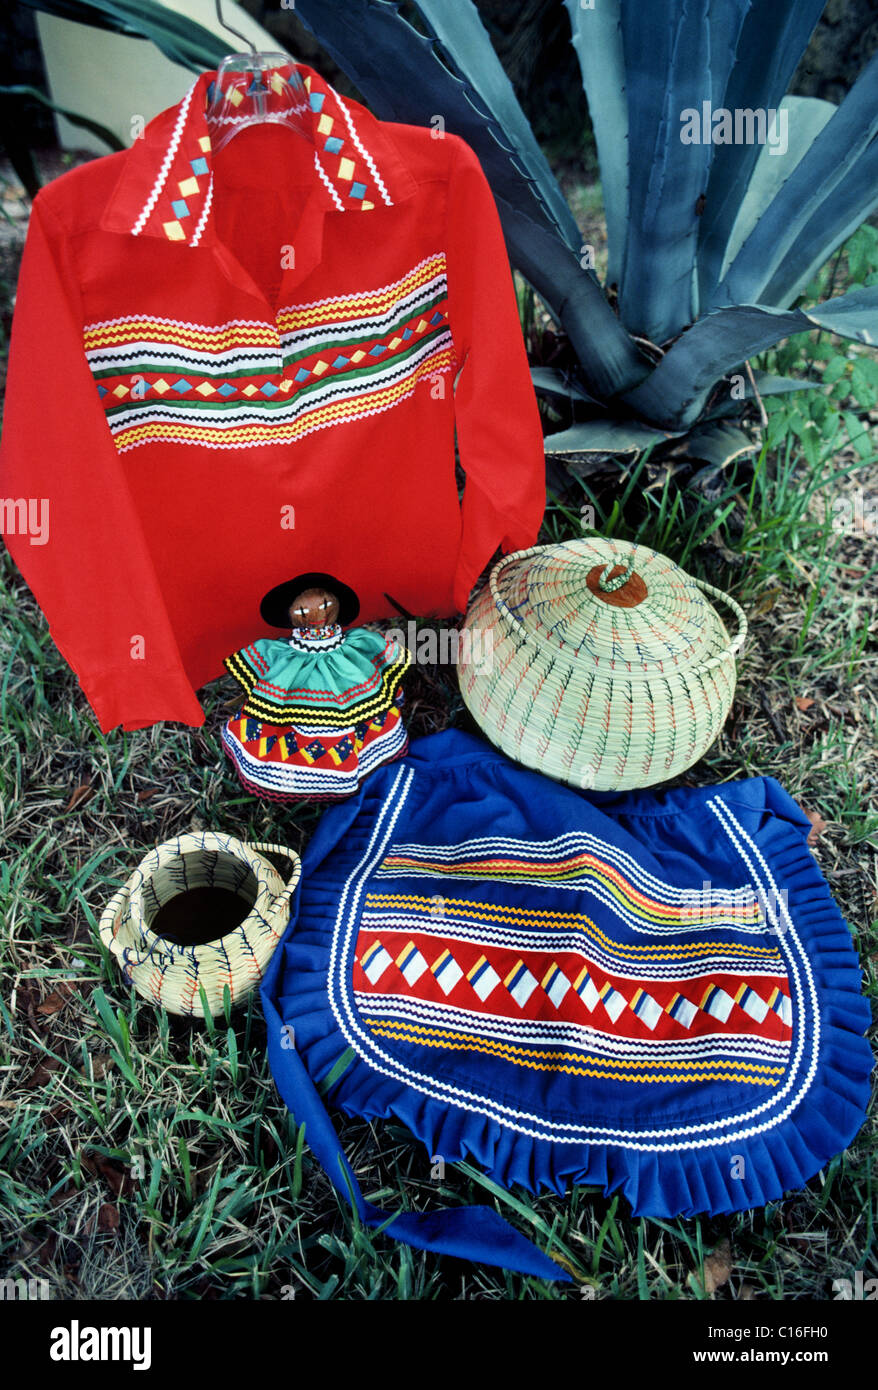 Traditional Miccosukee and Seminole Indian clothing and handicrafts displayed at a tribal village in the Florida Everglades, USA Stock Photo